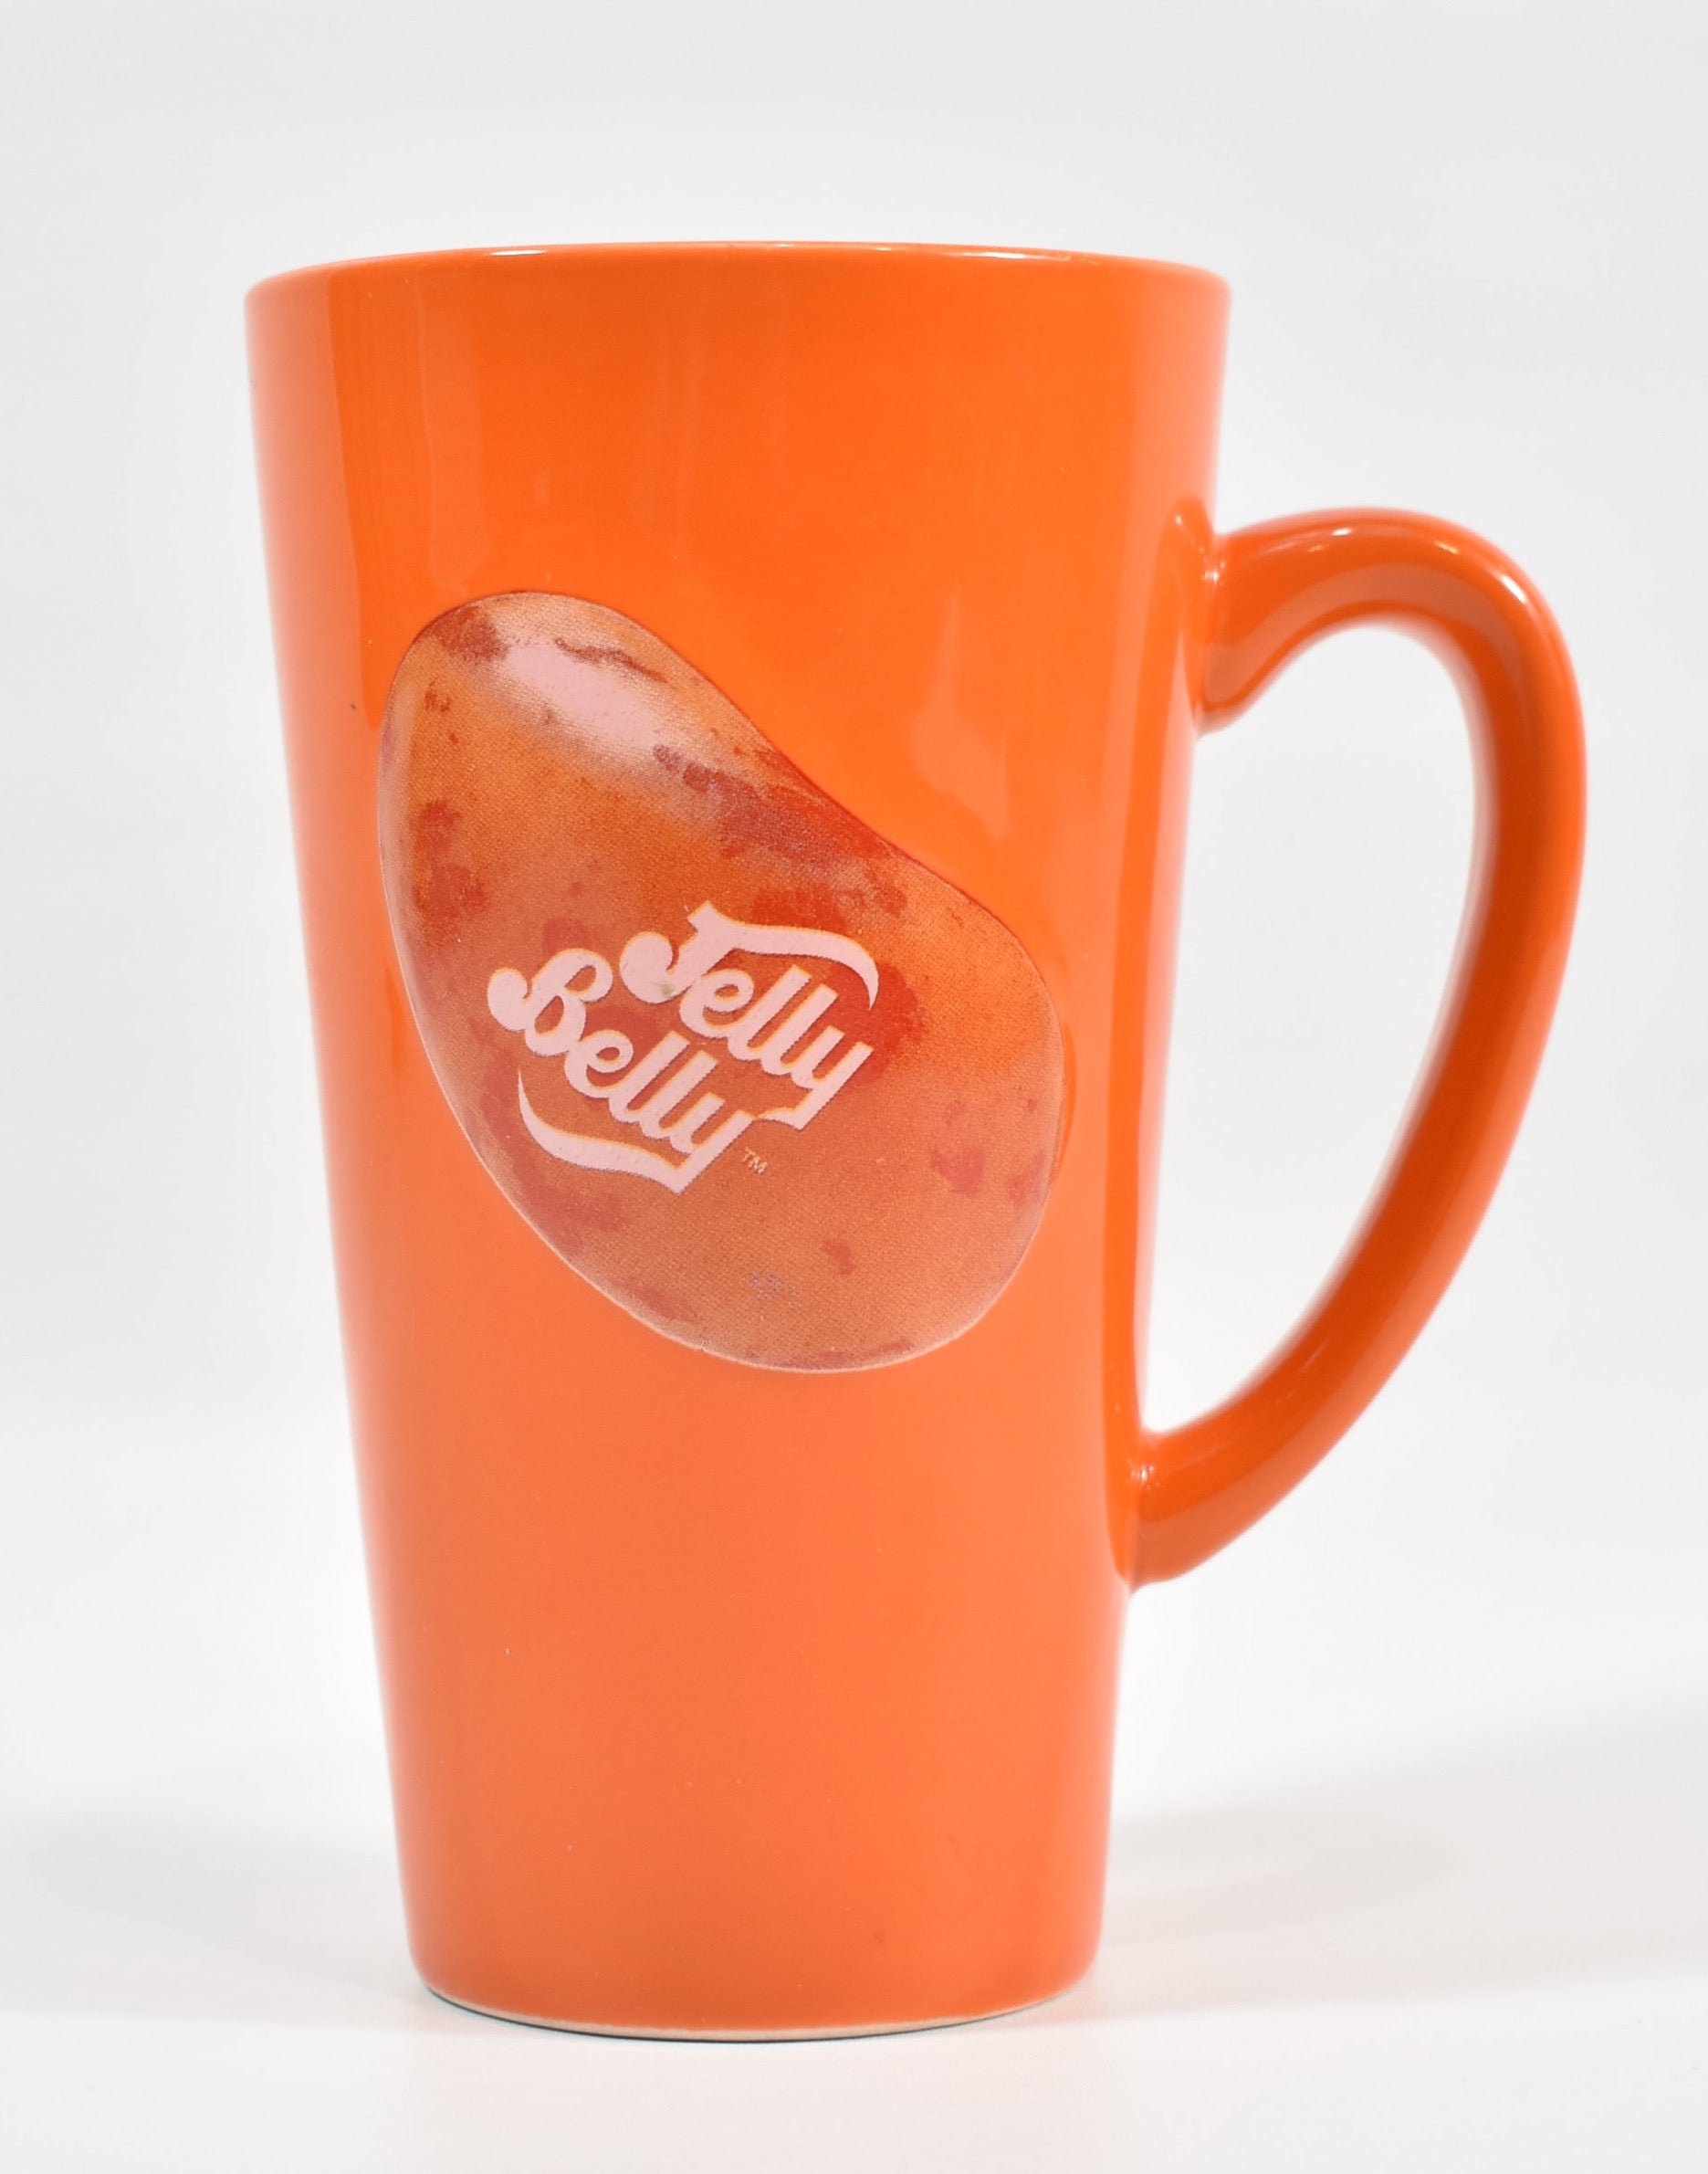 Jelly Belly Collectible Cup Orange Tall Glass Cup 2012